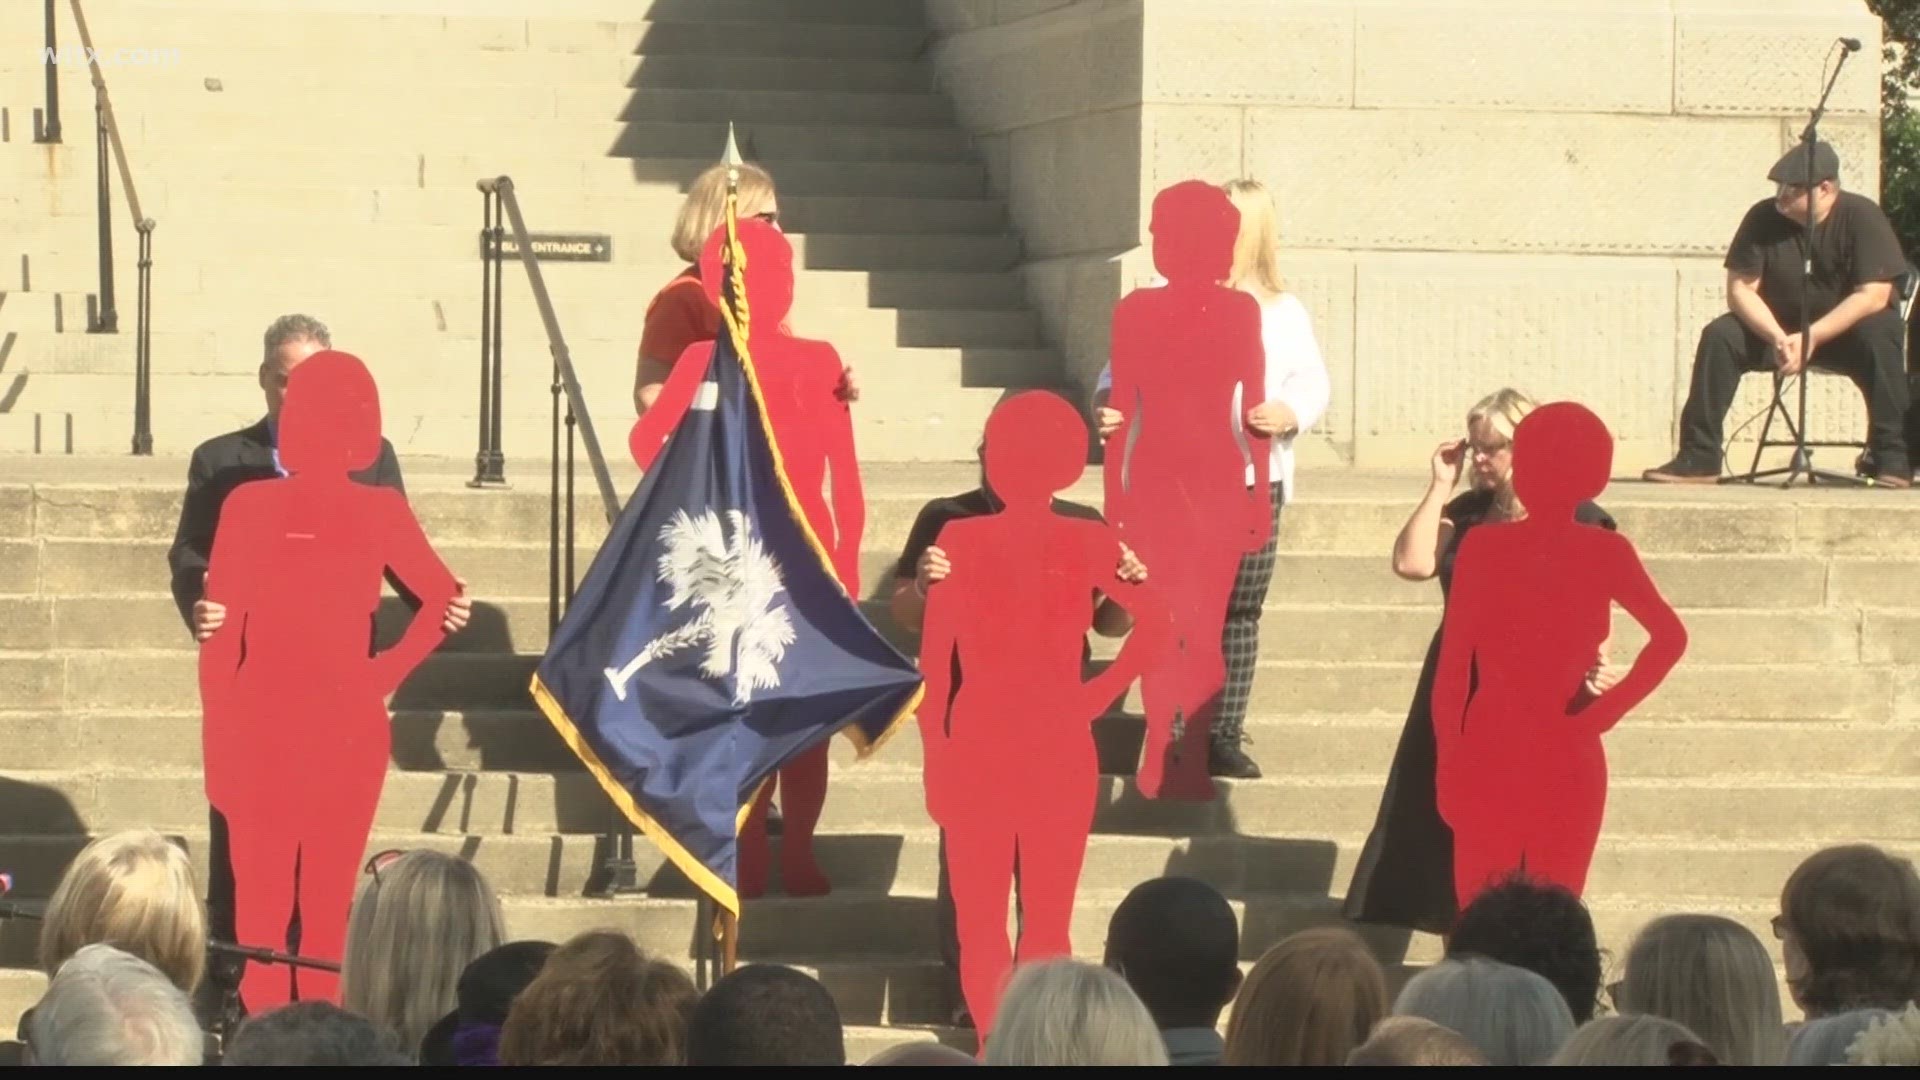 Victims of fatal domestic abuse in South Carolina have been honored through the ceremony for 26 years. This year, 37 silhouettes stood on the statehouse steps.